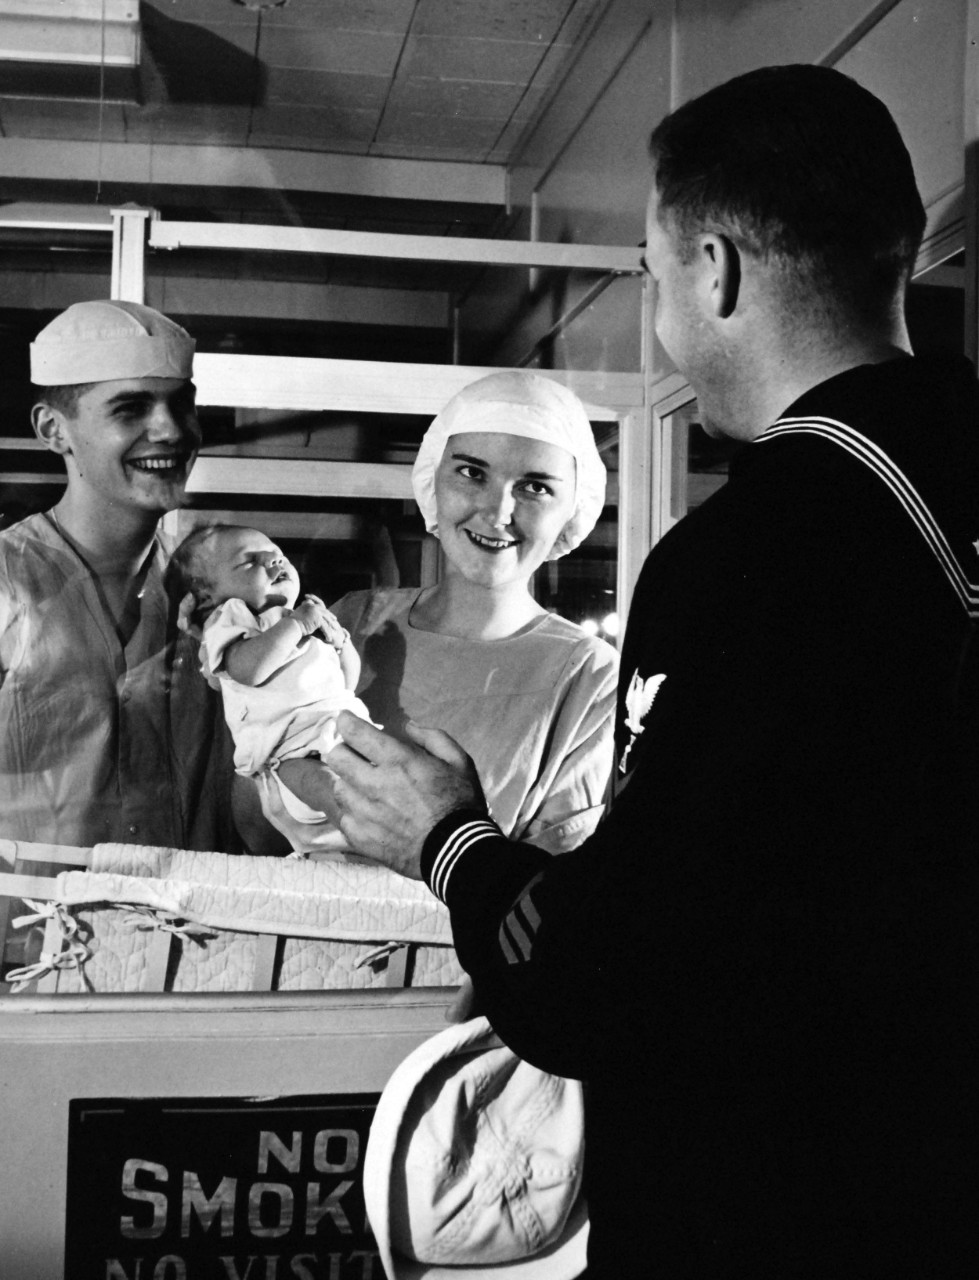 USN 709747:   A U.S. Navy Nurse and others a nursery, January 1957.   A proud sailor smiles approvingly as he sees his infant son for the first time.  In charge of the Nursery at the U.S. Naval Hospital, Bethesda, Maryland, is Navy Nurse, Lieutenant Junior Grade Virginia M. McGuigan, NC, USNR.   Assisting her is Hospital Corpsman Third Class Paul J. Altman, Jr.   Caring for dependents of military personnel is only one of the many duties of a Navy Nurse.  Photograph released January 4, 1957.  Official U.S. Navy photograph, now in the collections of the National Archives.   